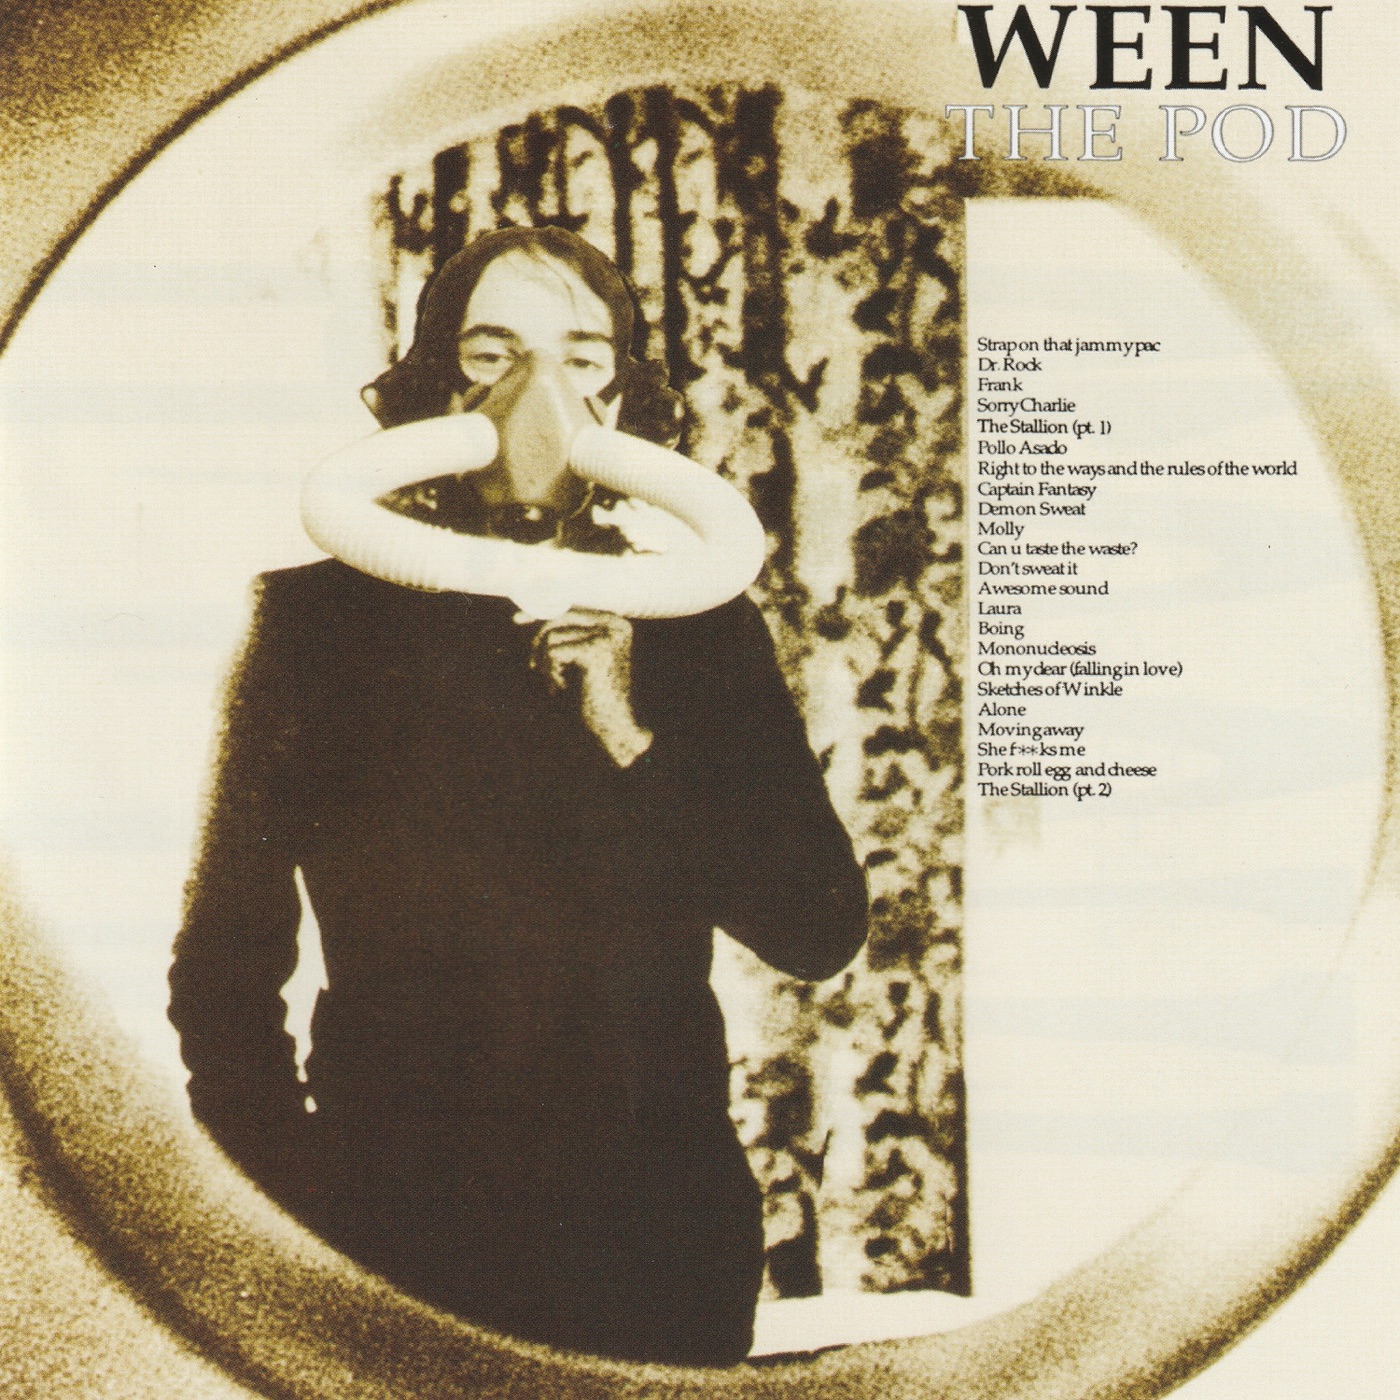 The Pod by Ween